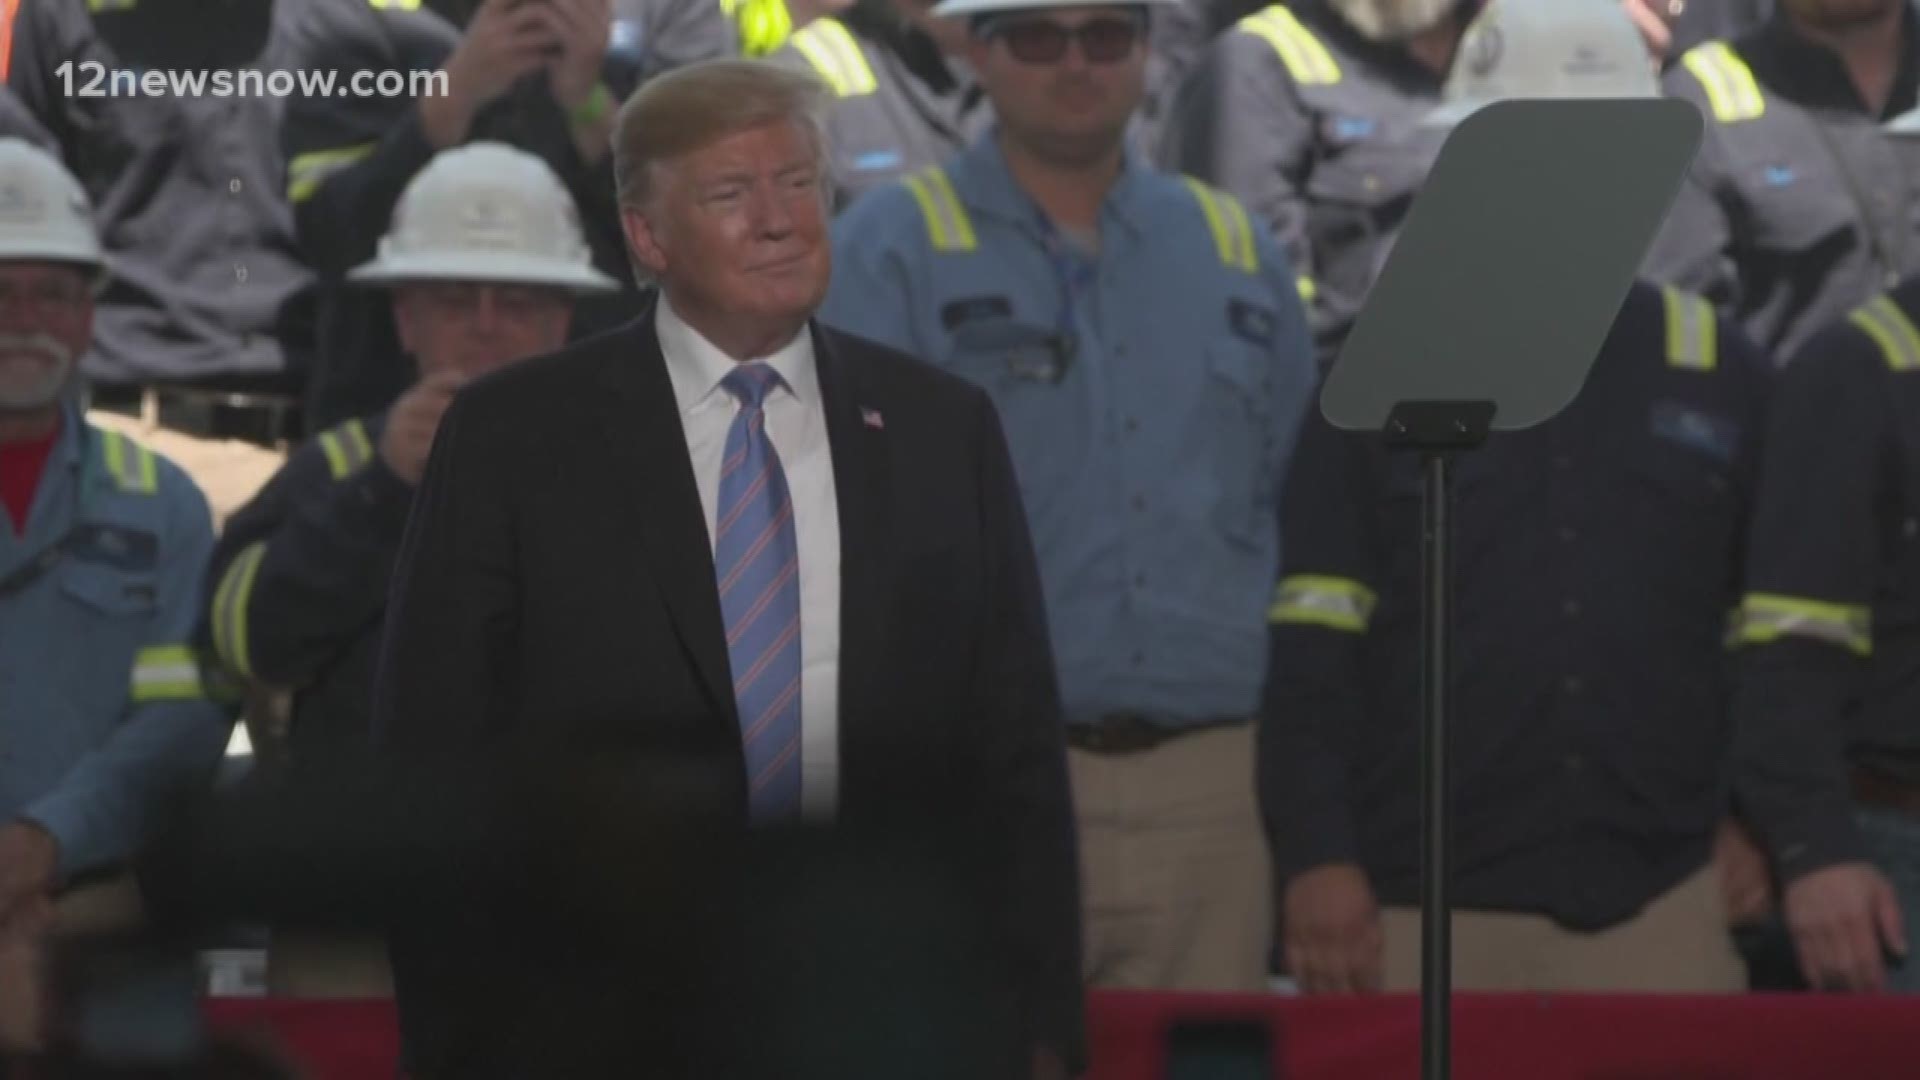 President Trump arrived in the state Tuesday to tour a $10 billion export terminal that will liquefy natural gas for storage and shipping.